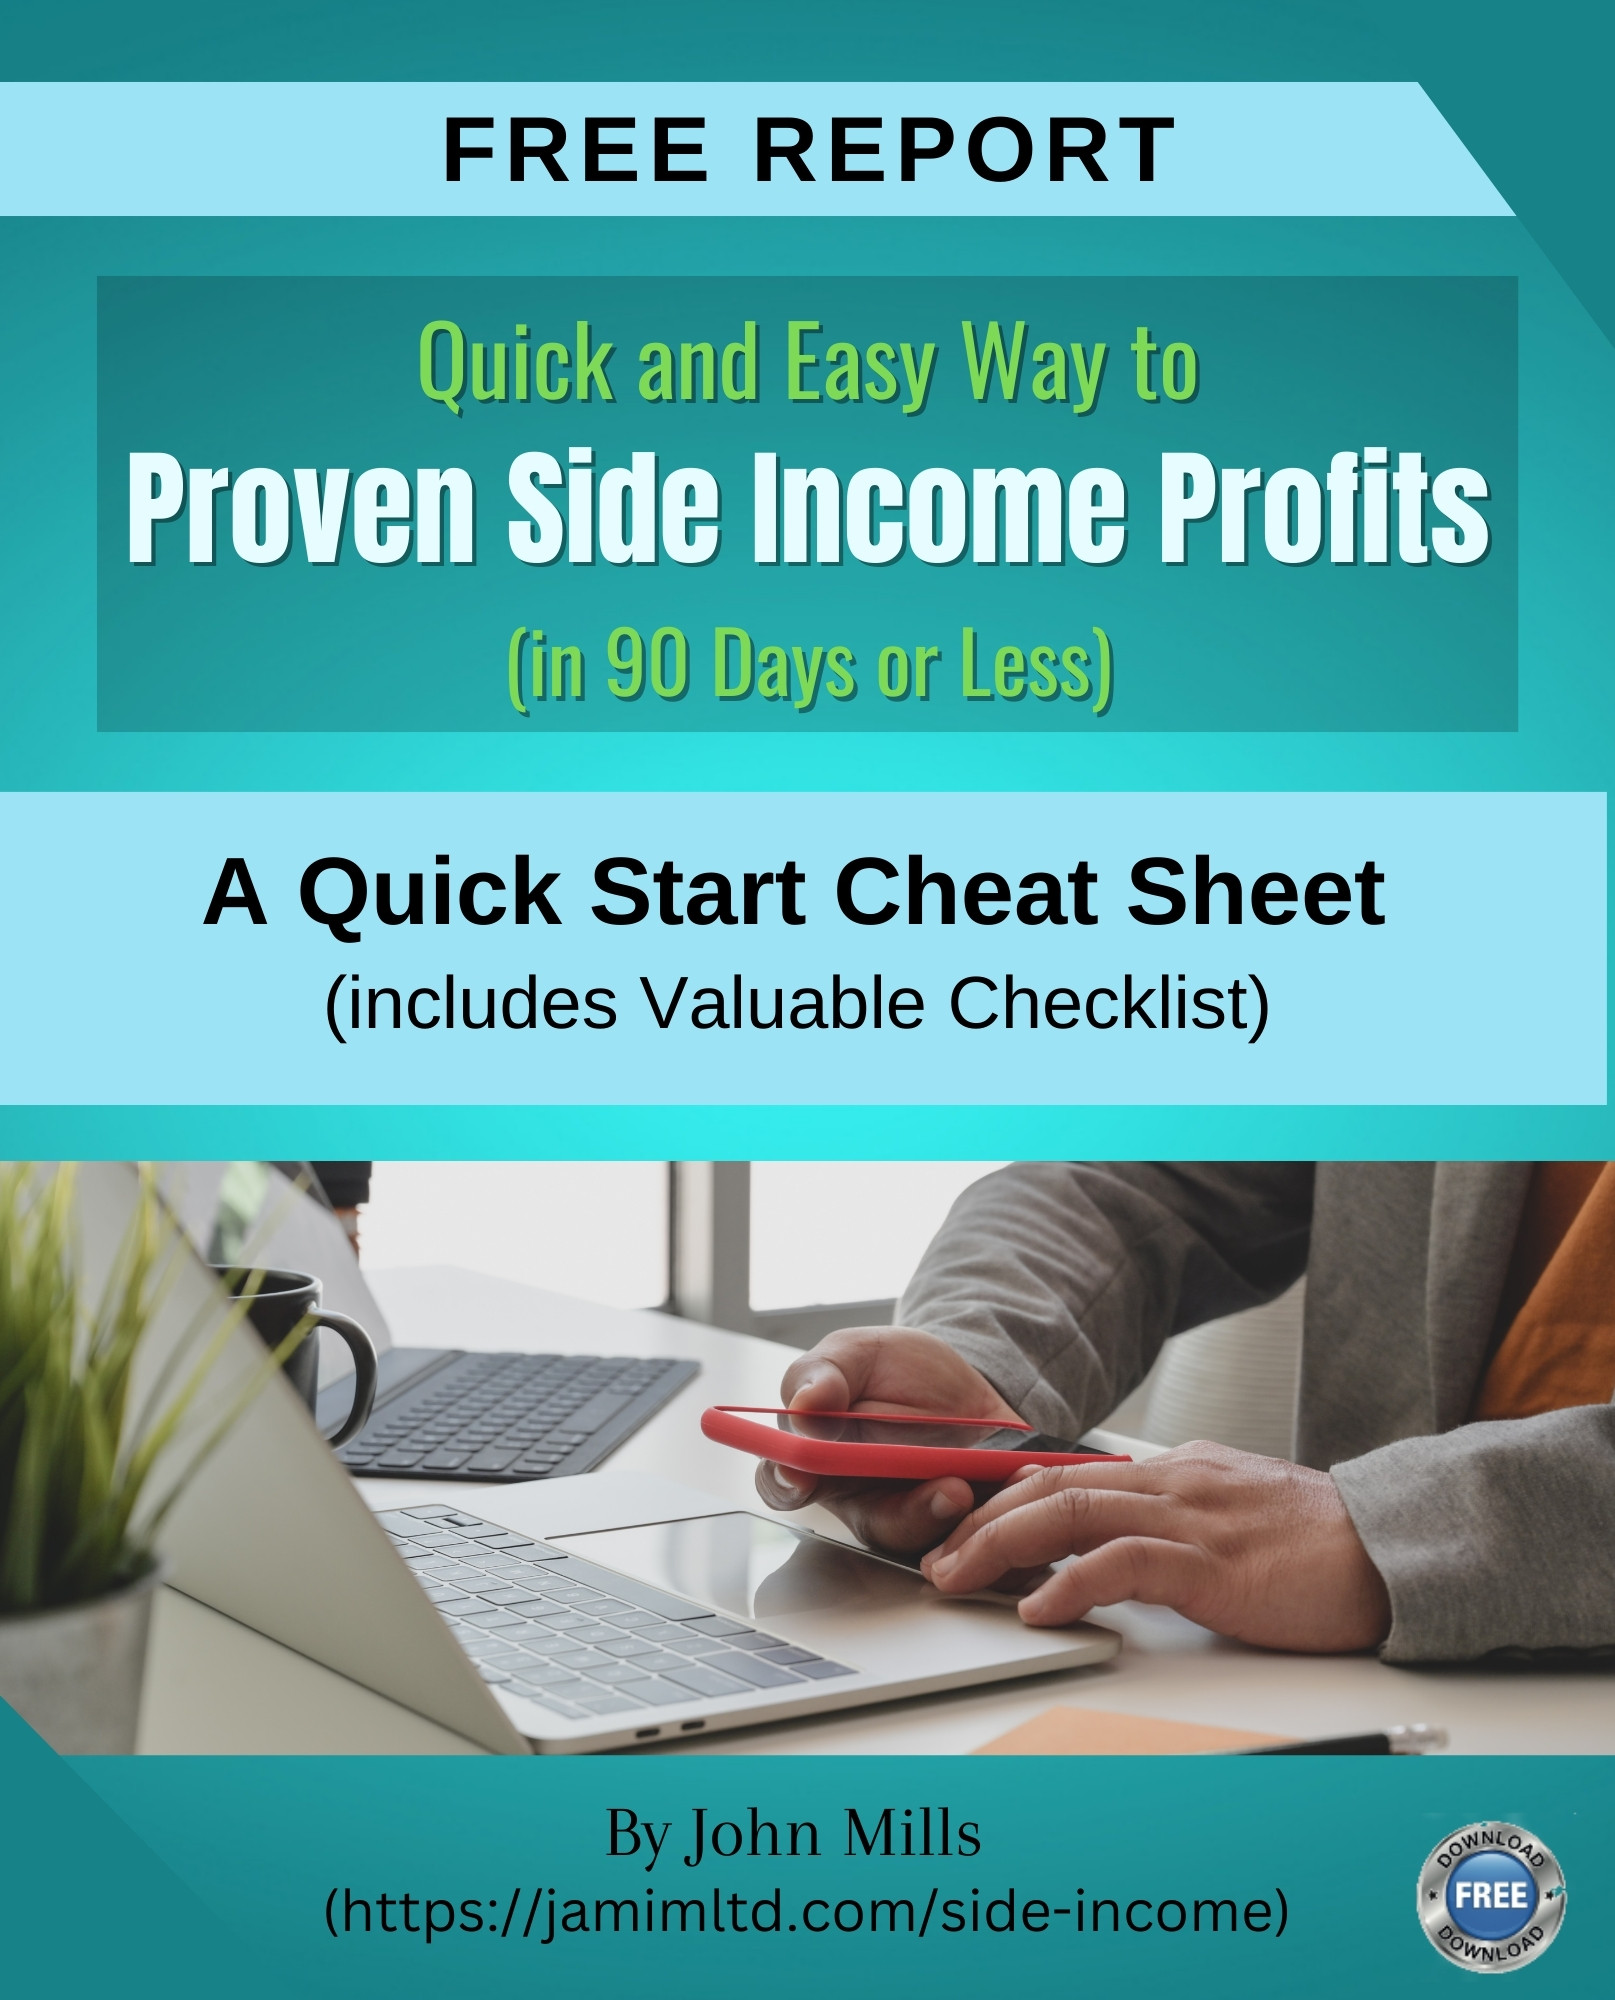 Transform Your Life and Income with Proven Side Income Profits